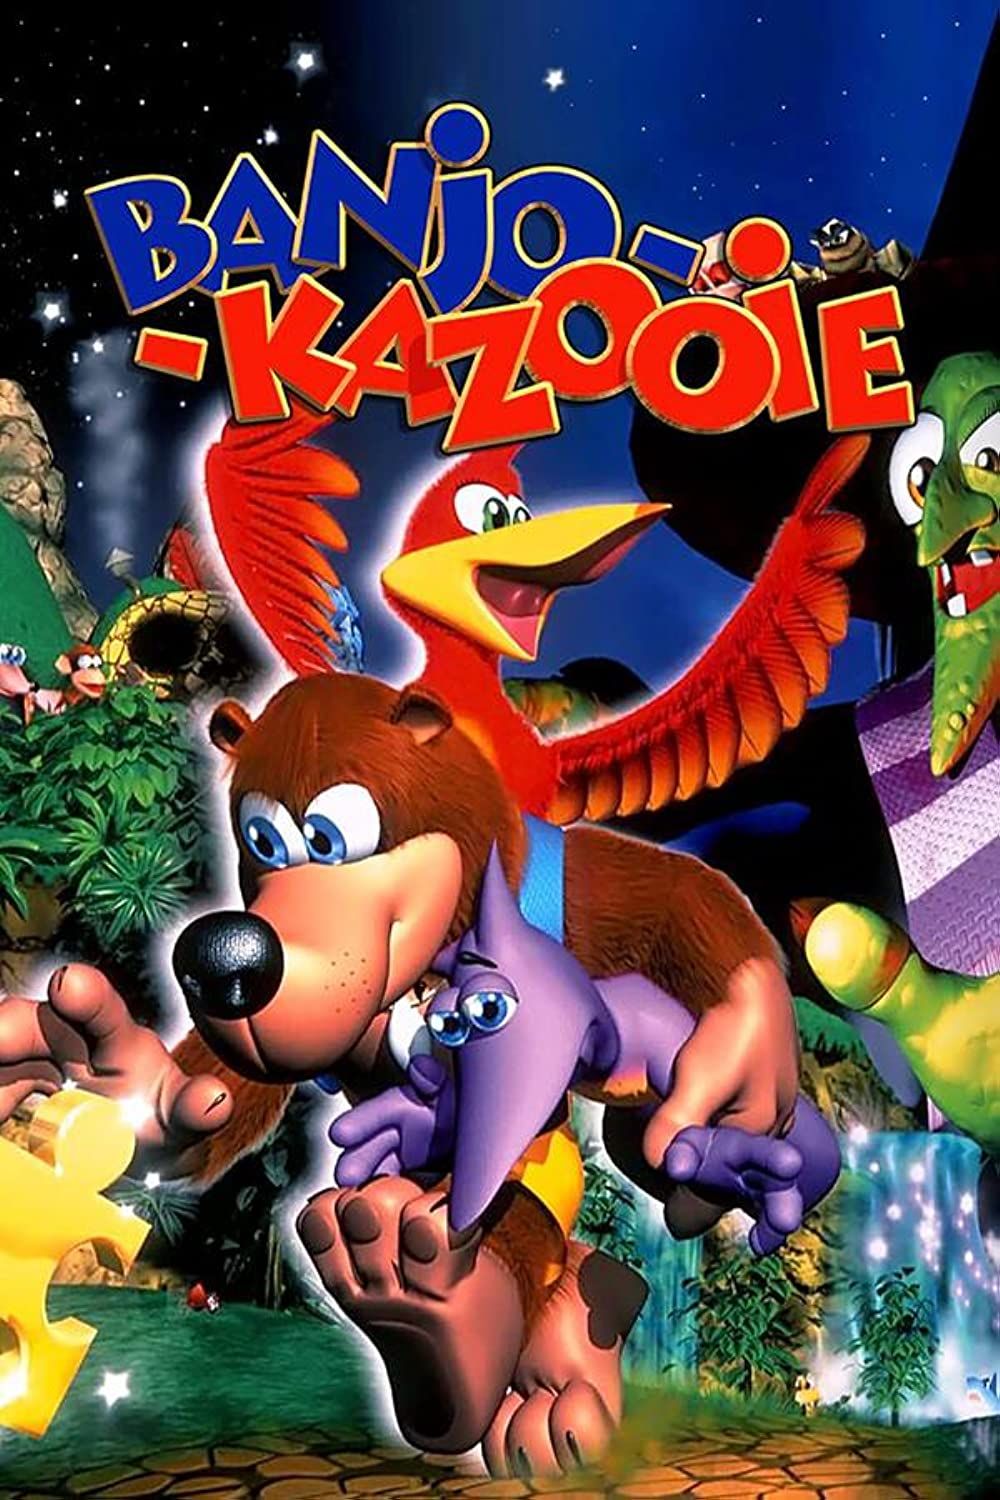 Tears of the Kingdom Is Giving Me Banjo Kazooie: Nuts and Bolts Energy